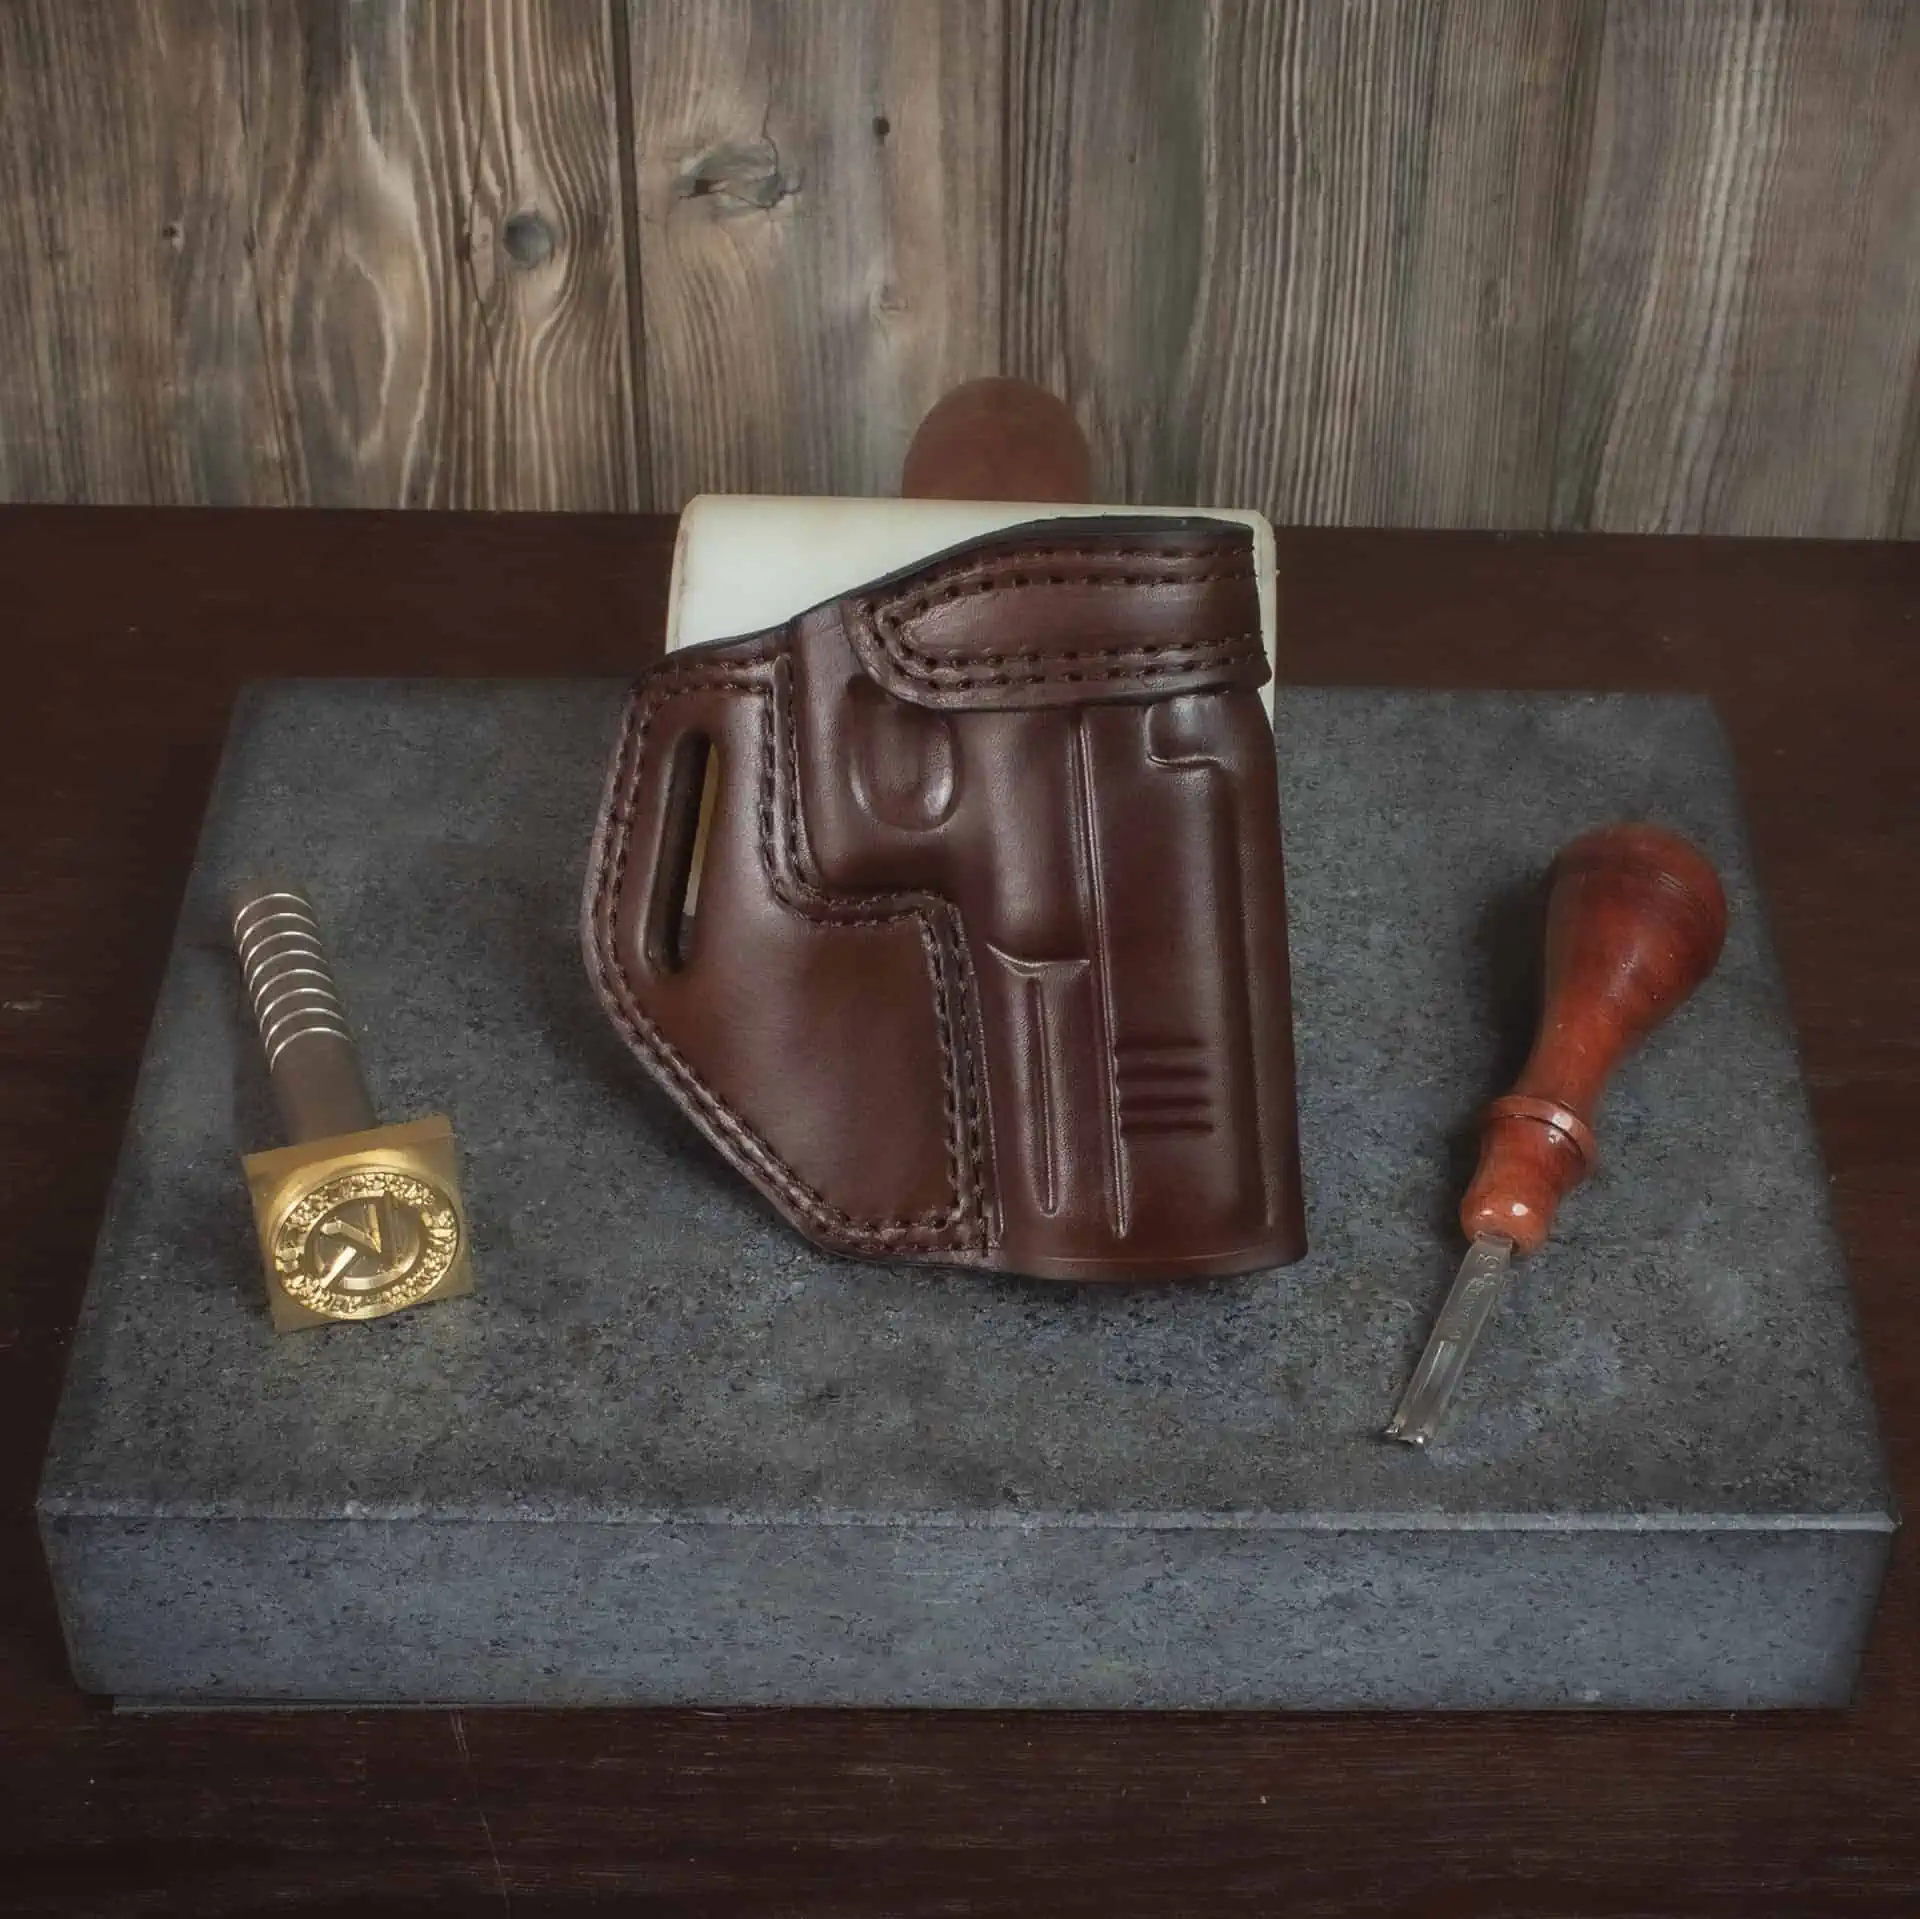 Quickship Glock 17 OWB Leather Holster - Texas Strong Side